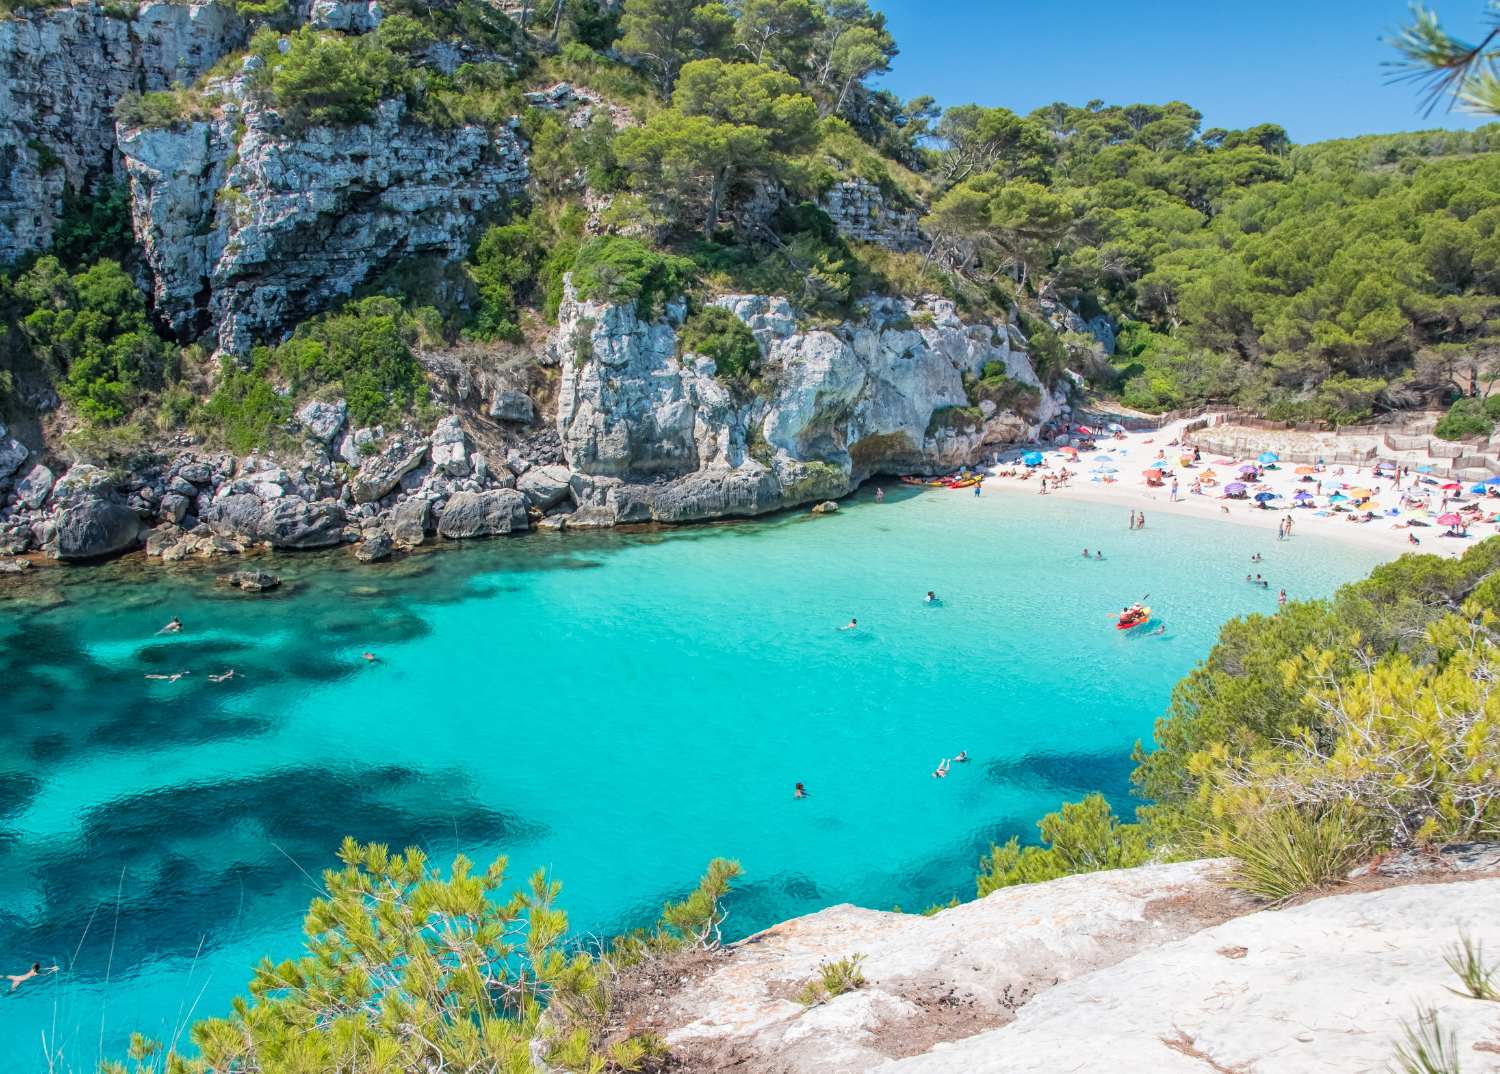 Menorca is one of the least crowded Balearic Islands in Spain